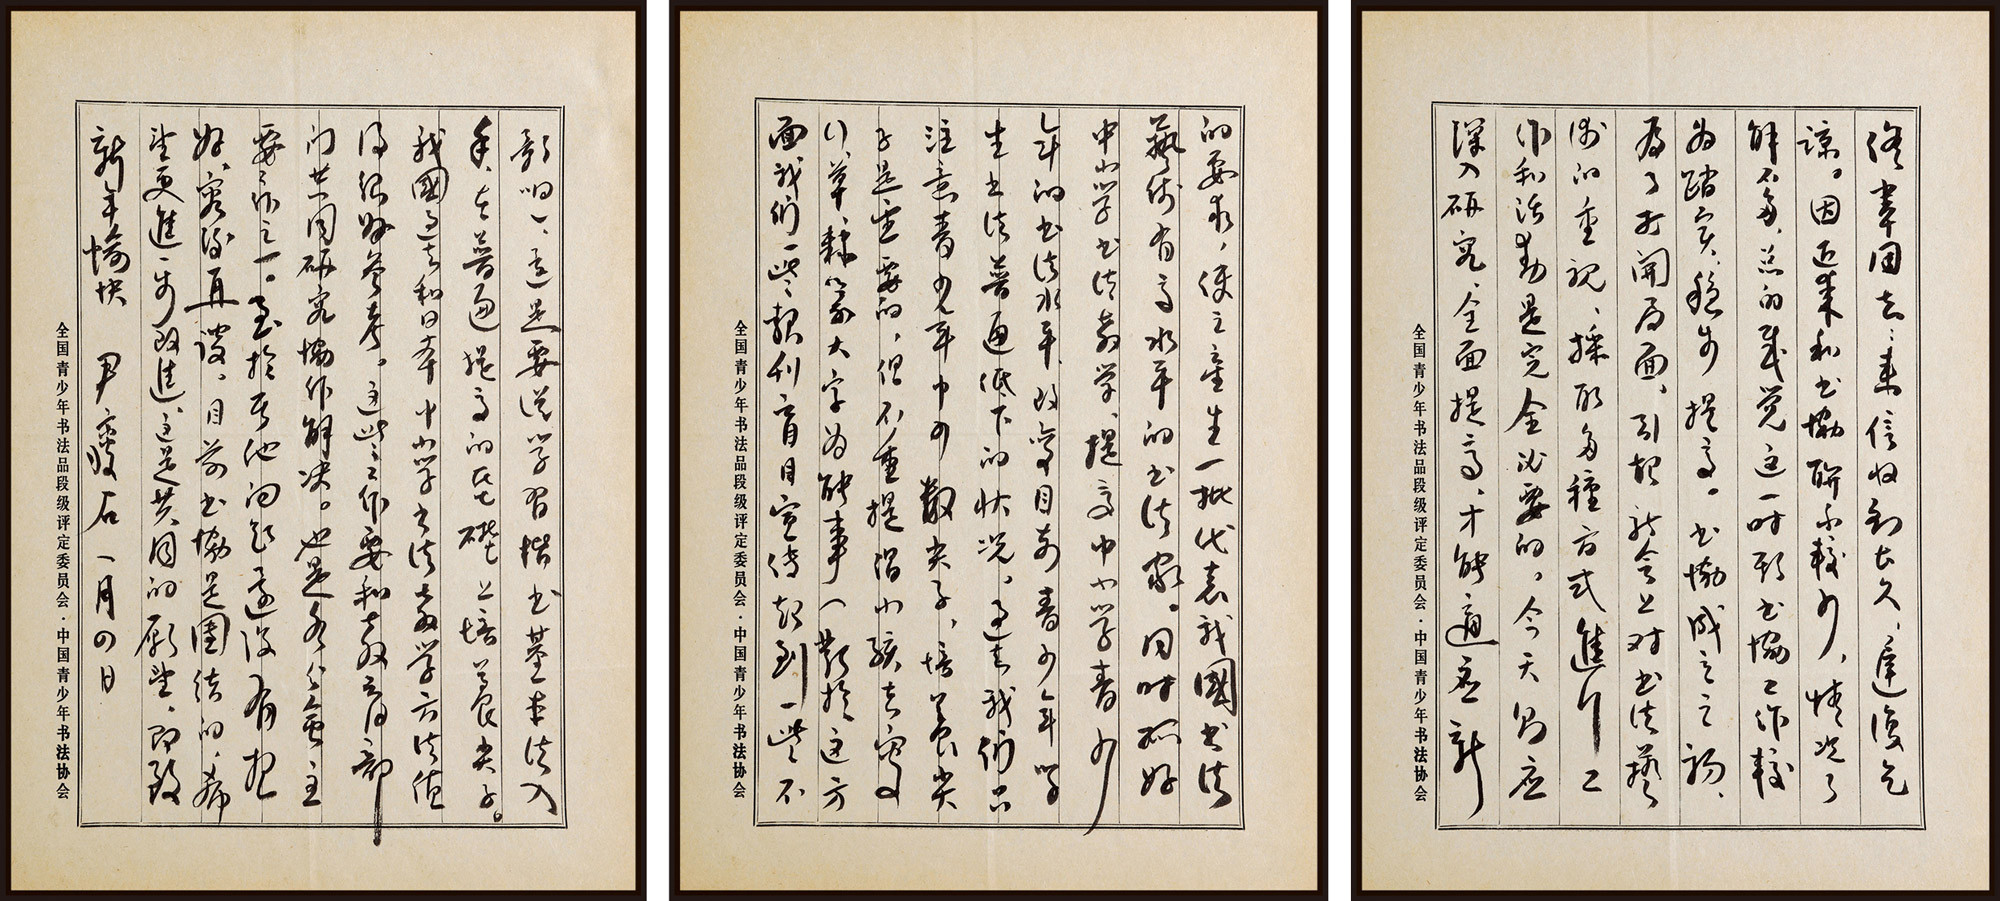 A letter written by Yin Shoushi 3 pages in 1 copy